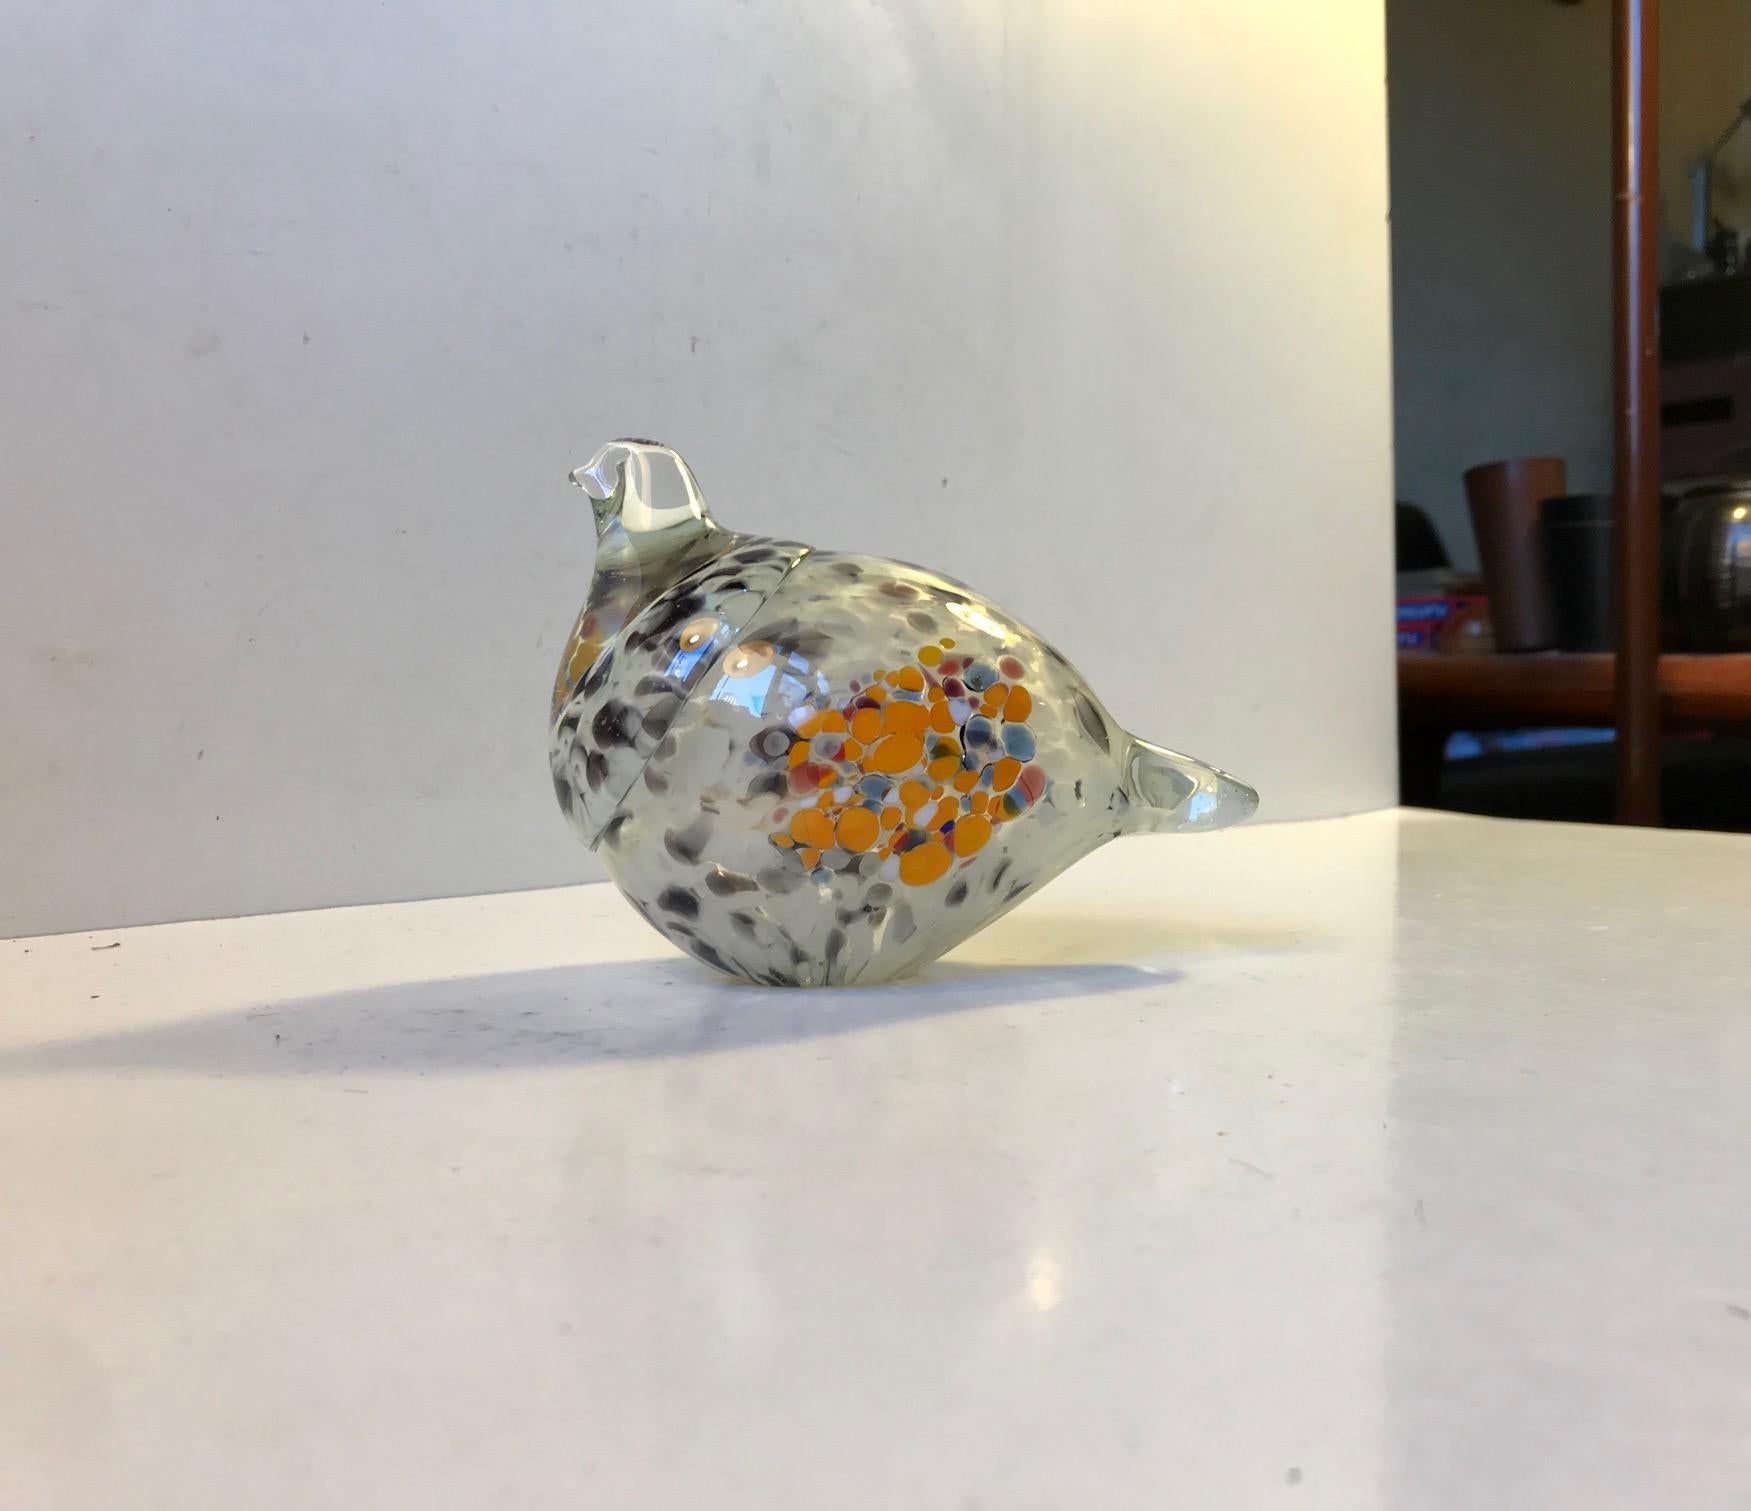 Unique art glass figurine of bird, partridge. Designed and created at Kauni Glass Studio in Denmark during the 1970s. The style and artistry are reminiscent of Oiva Toikka for Littala.